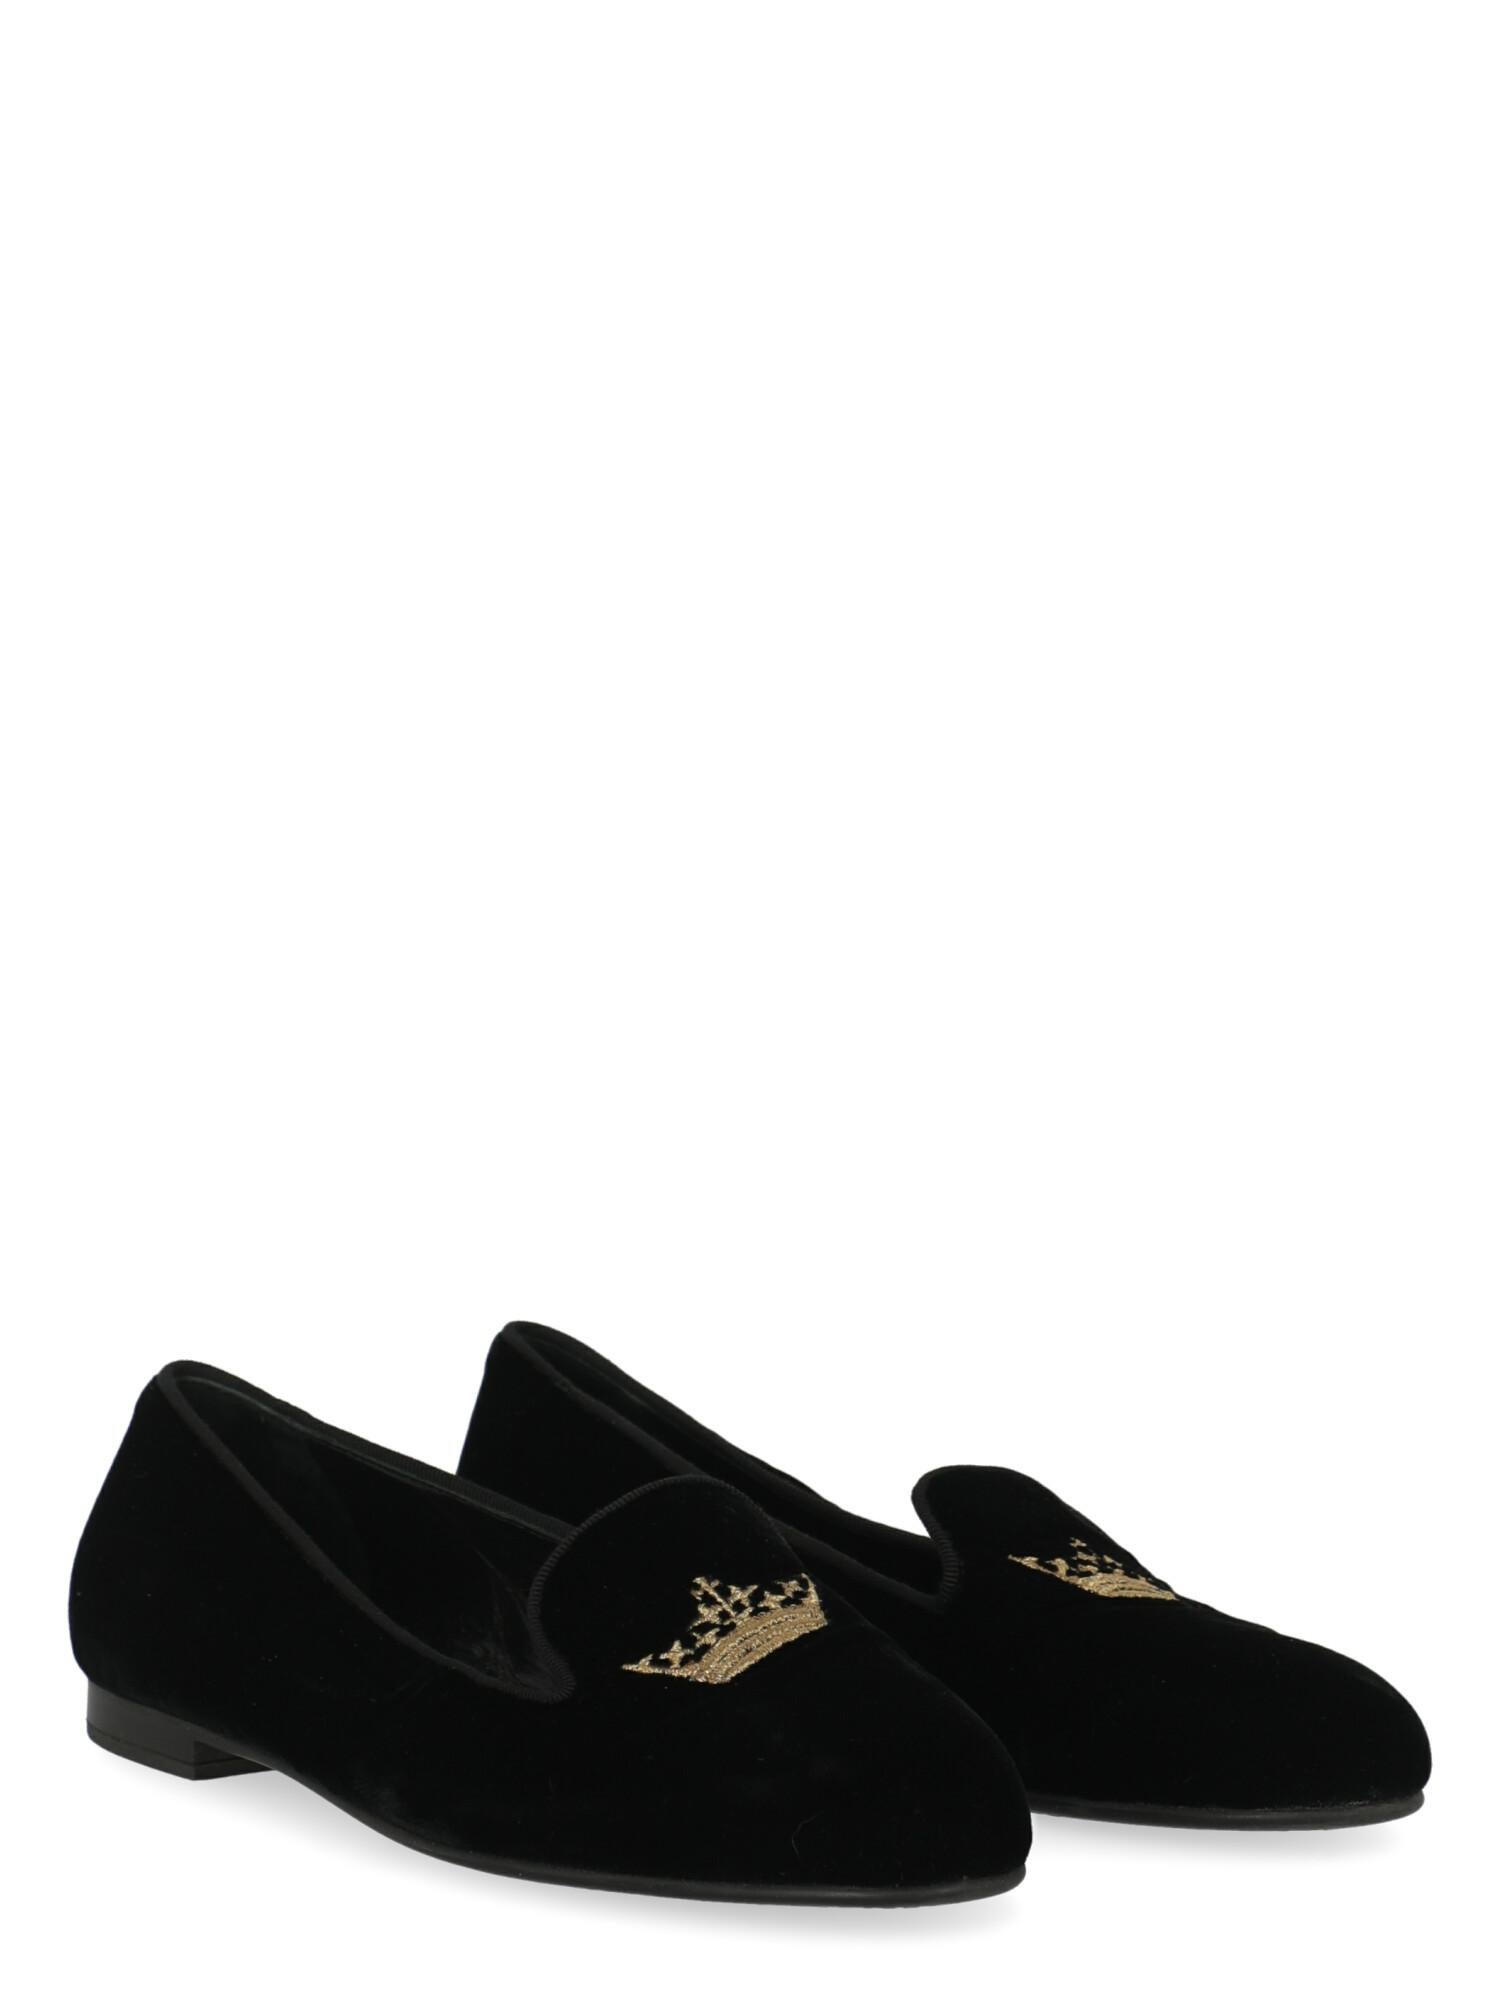 Product Description: Ballet flats, fabric, solid color, velvet, round toe, branded insole, branded sole, block heel, low and flat heel, embroidered detail

Includes:
- Dust bag

Product Condition: Very Good
Sole: negligible signs of use. Upper: